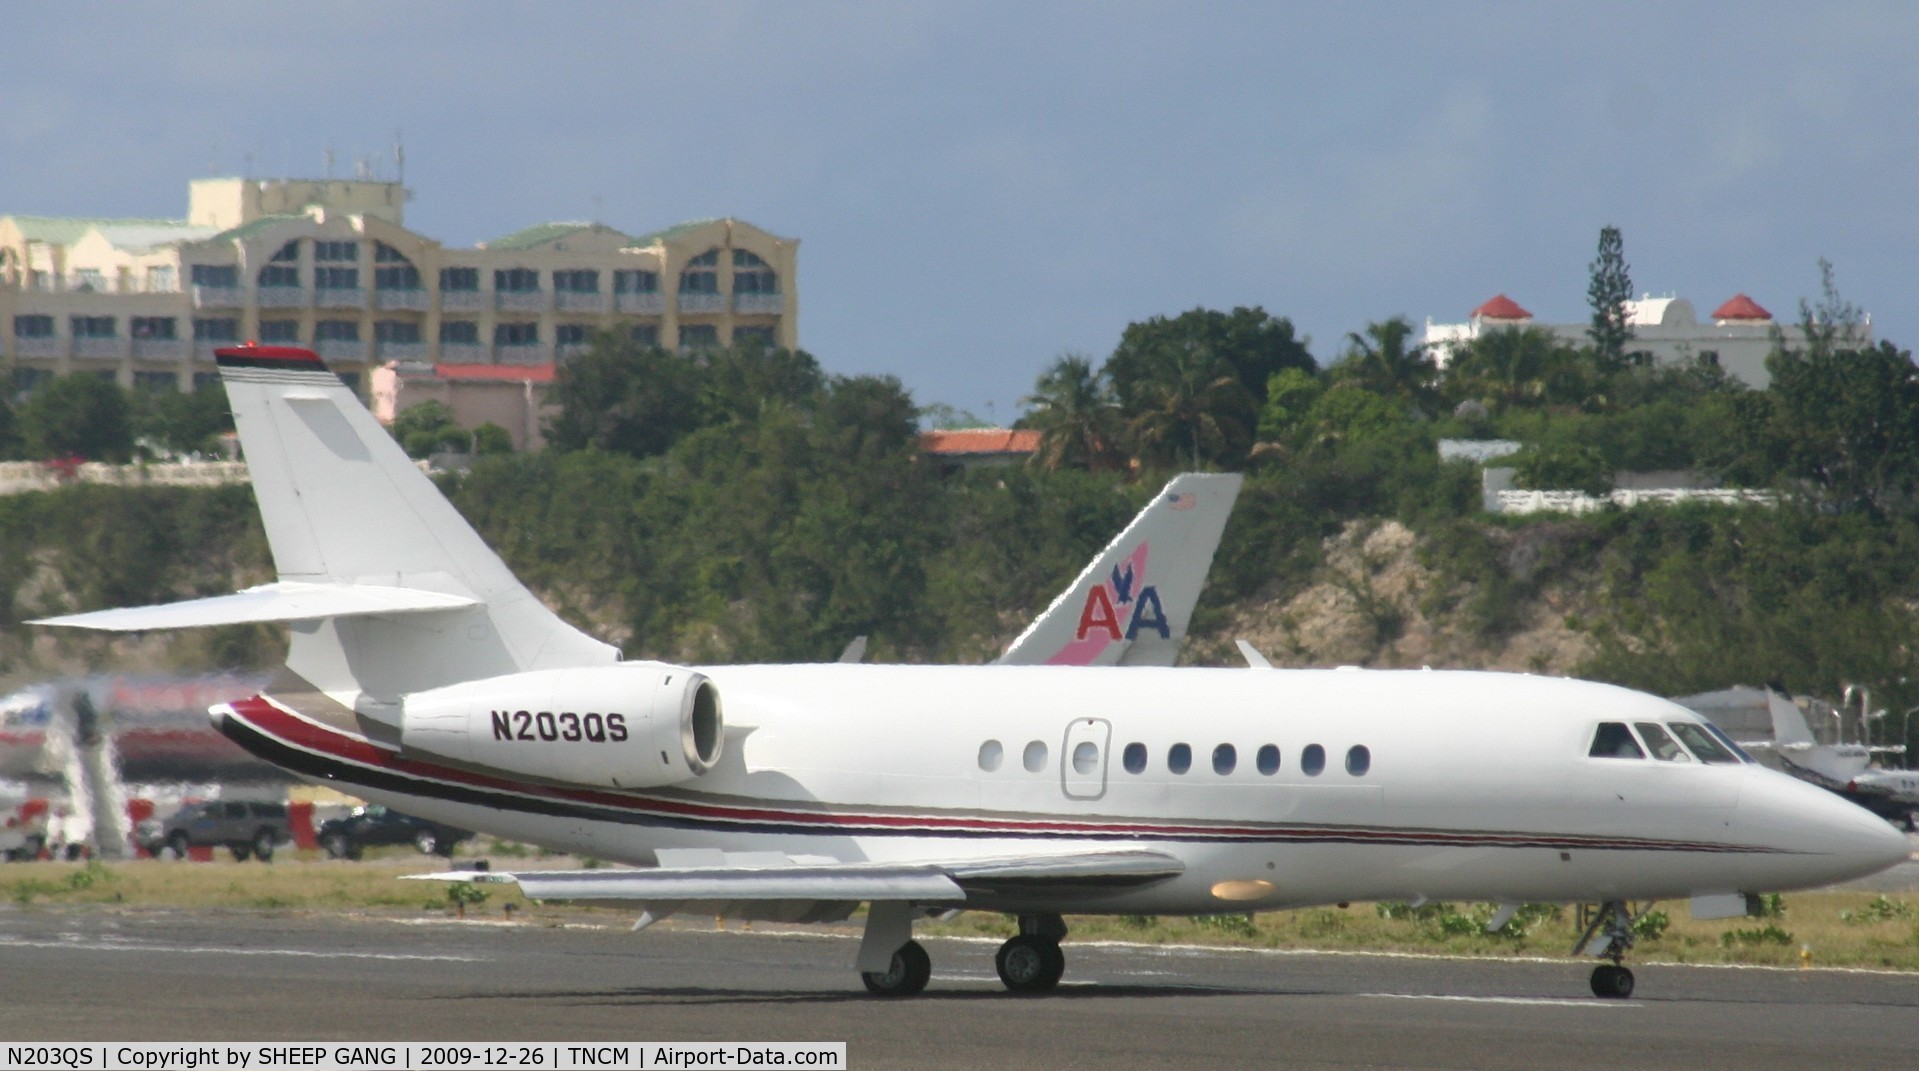 N203QS, 2002 Dassault Falcon 2000 C/N 198, N203QS just landed and now back tracking on the runway